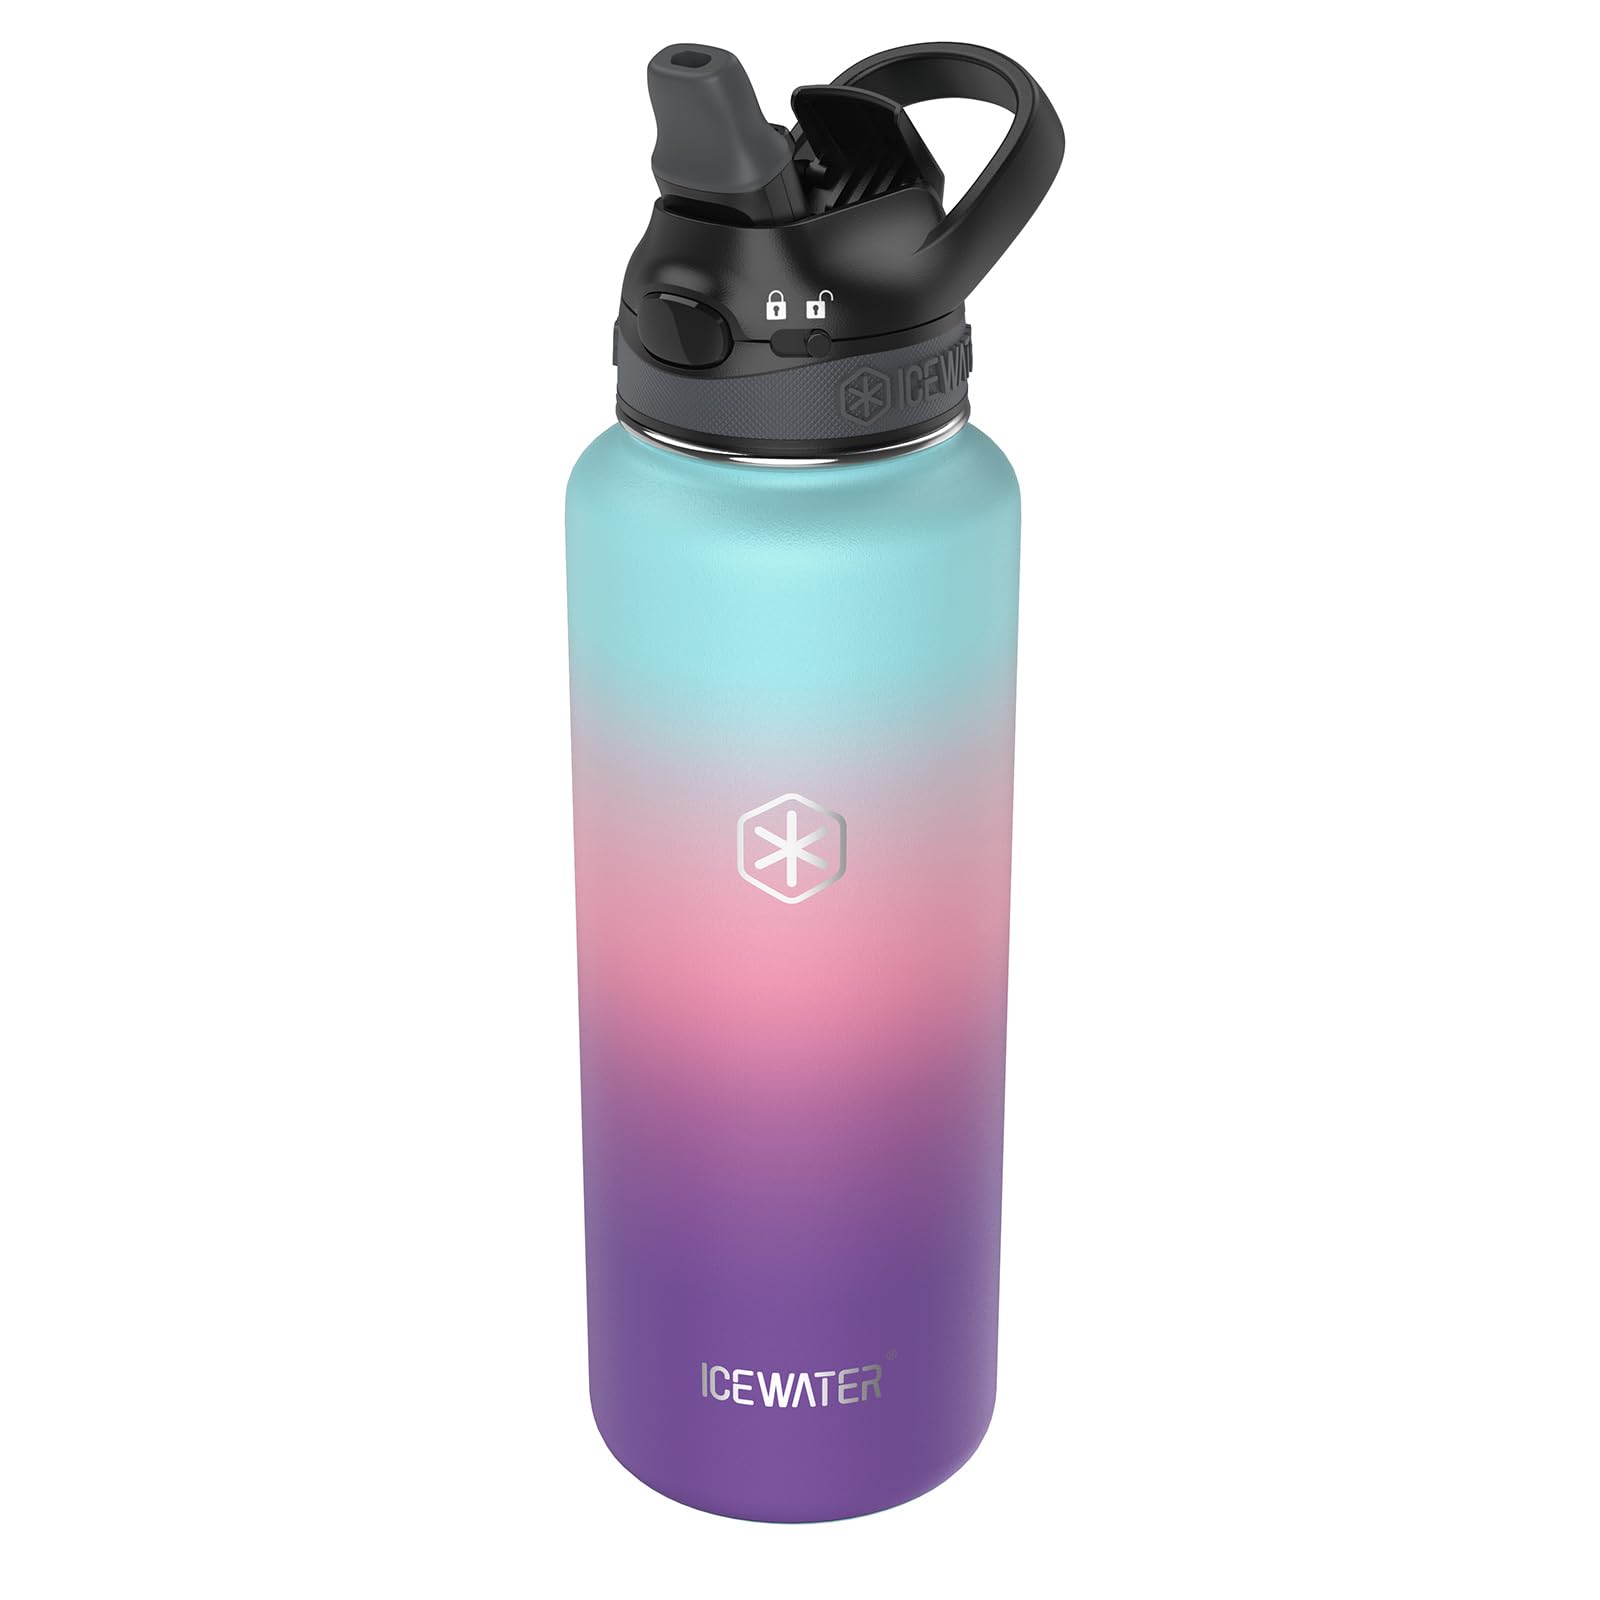 ICEWATER - 40 oz, Insulated Water Bottle With Auto Straw Lid and Carry Handle, Leakproof Lockable Lid with Soft Silicone Spout, One-hand Operation, Vacuum Stainless Steel (40 oz, Purple)